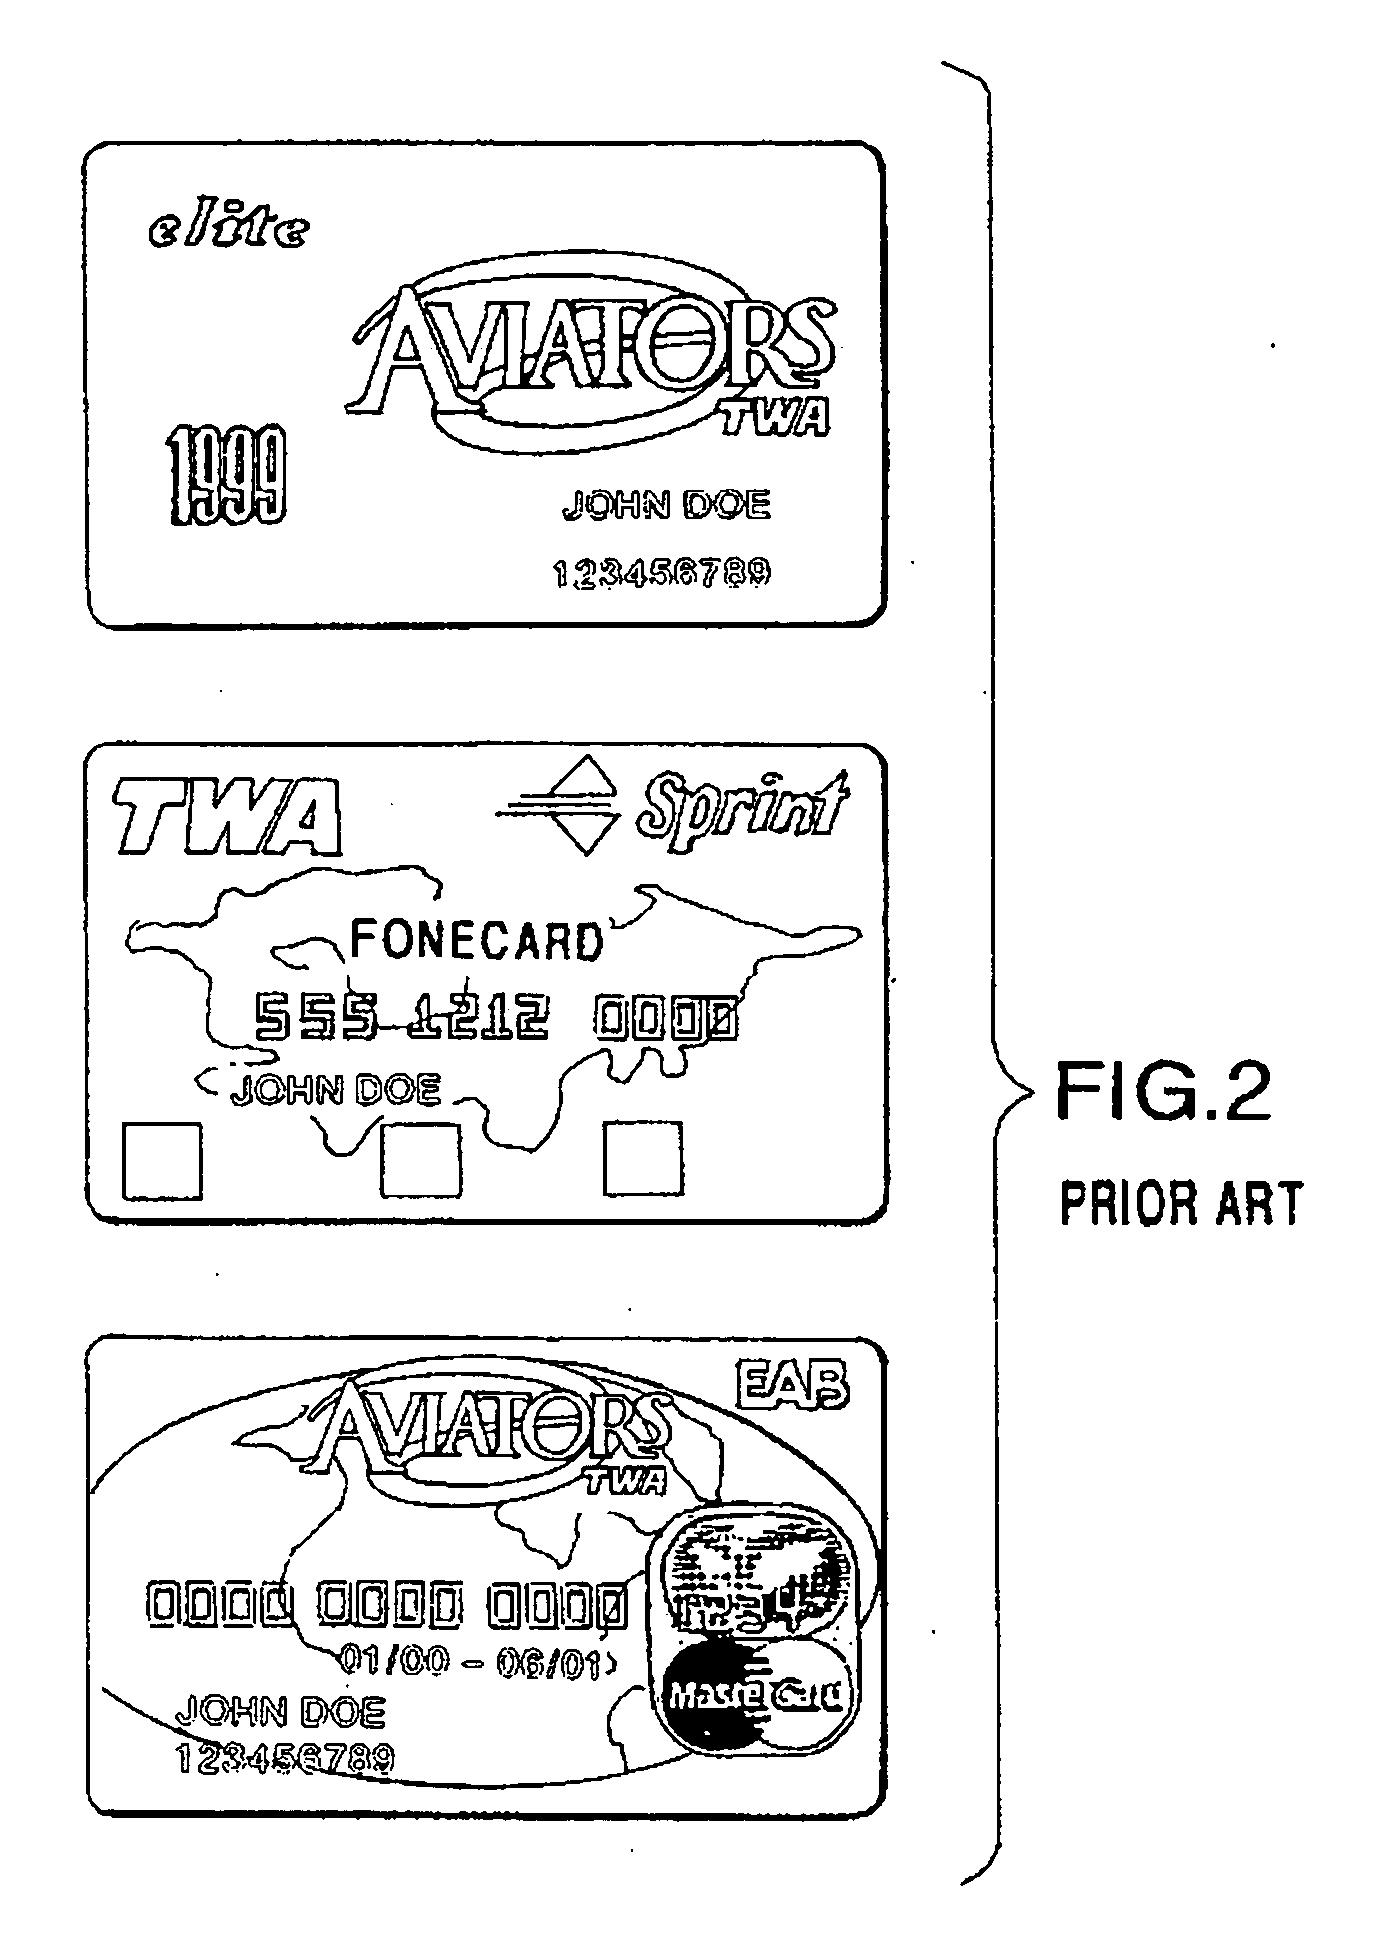 Method and system for using multi-function cards for storing, managing and aggregating reward points